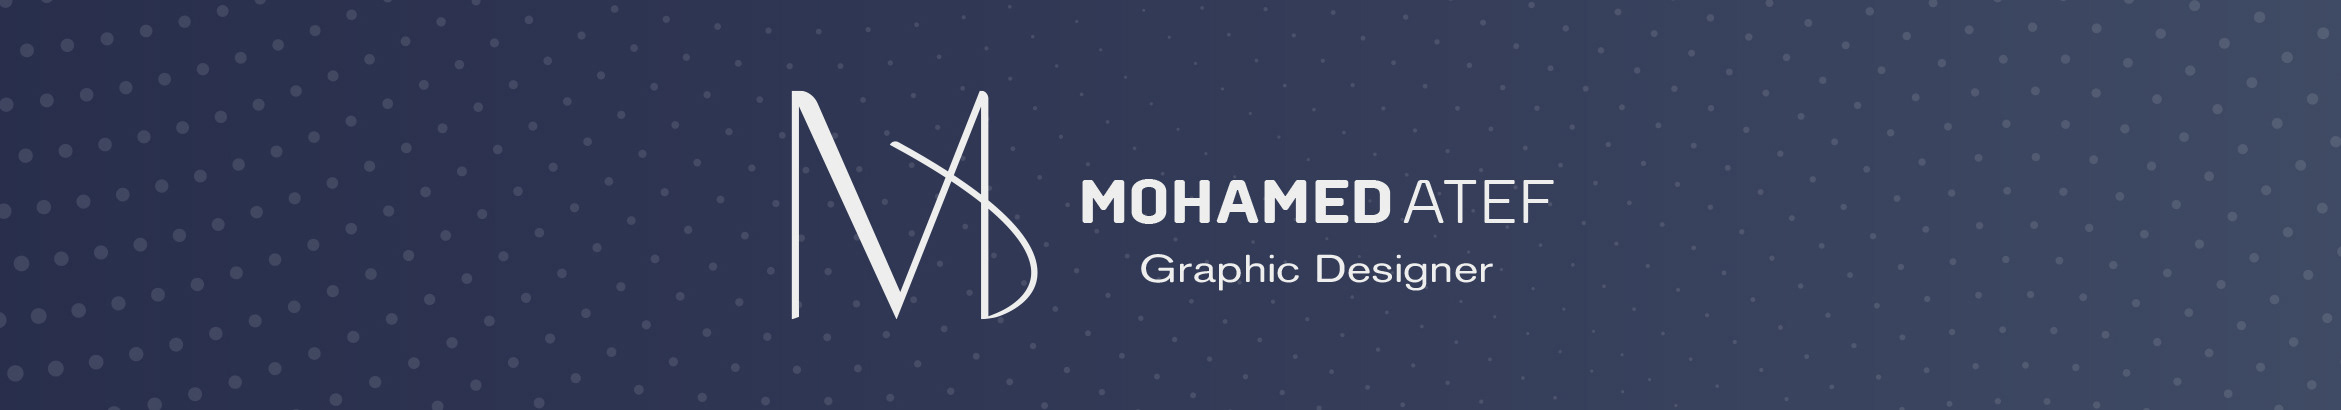 MOHMED ATEF's profile banner